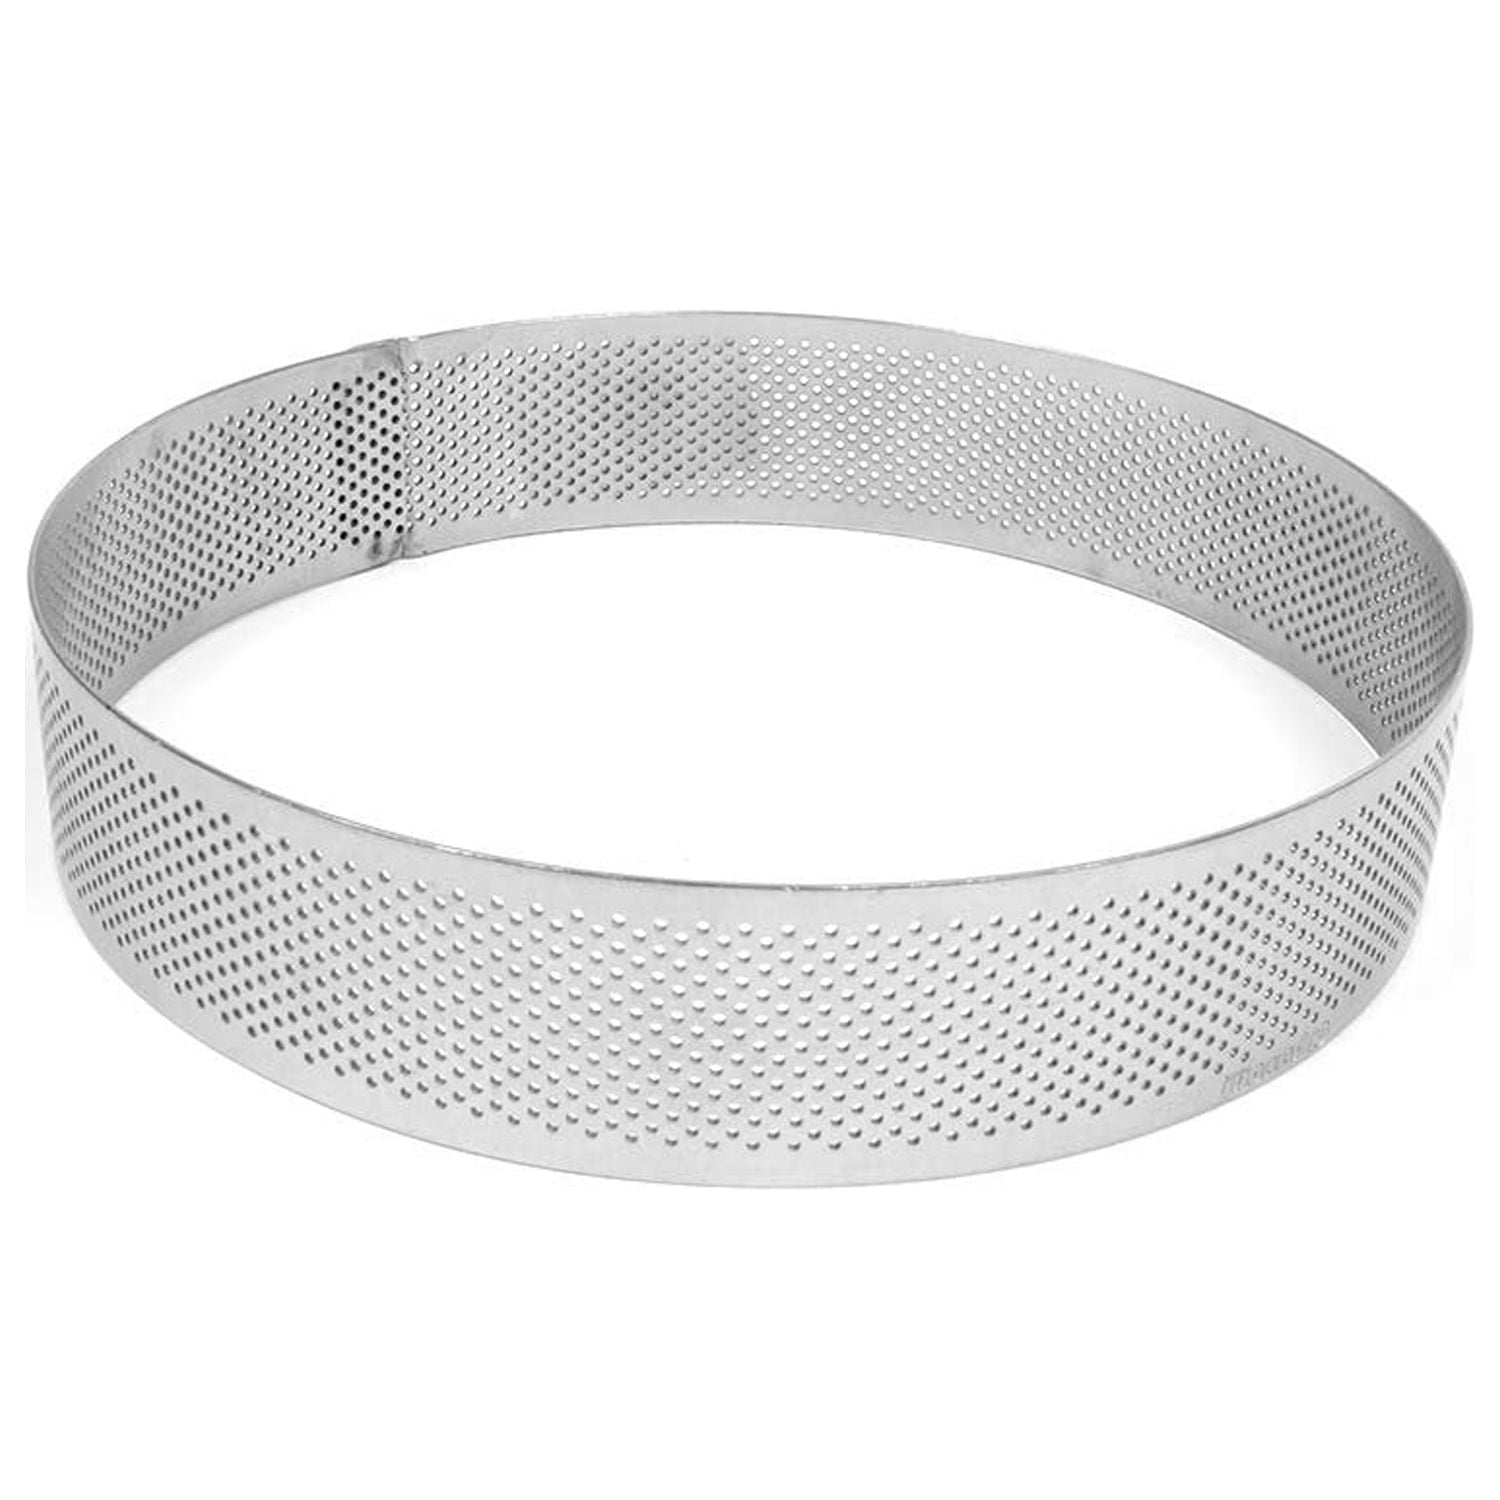 Pavoni Progetto Crostate Perforated Stainless Steel Round Tart Ring 3.5 ...